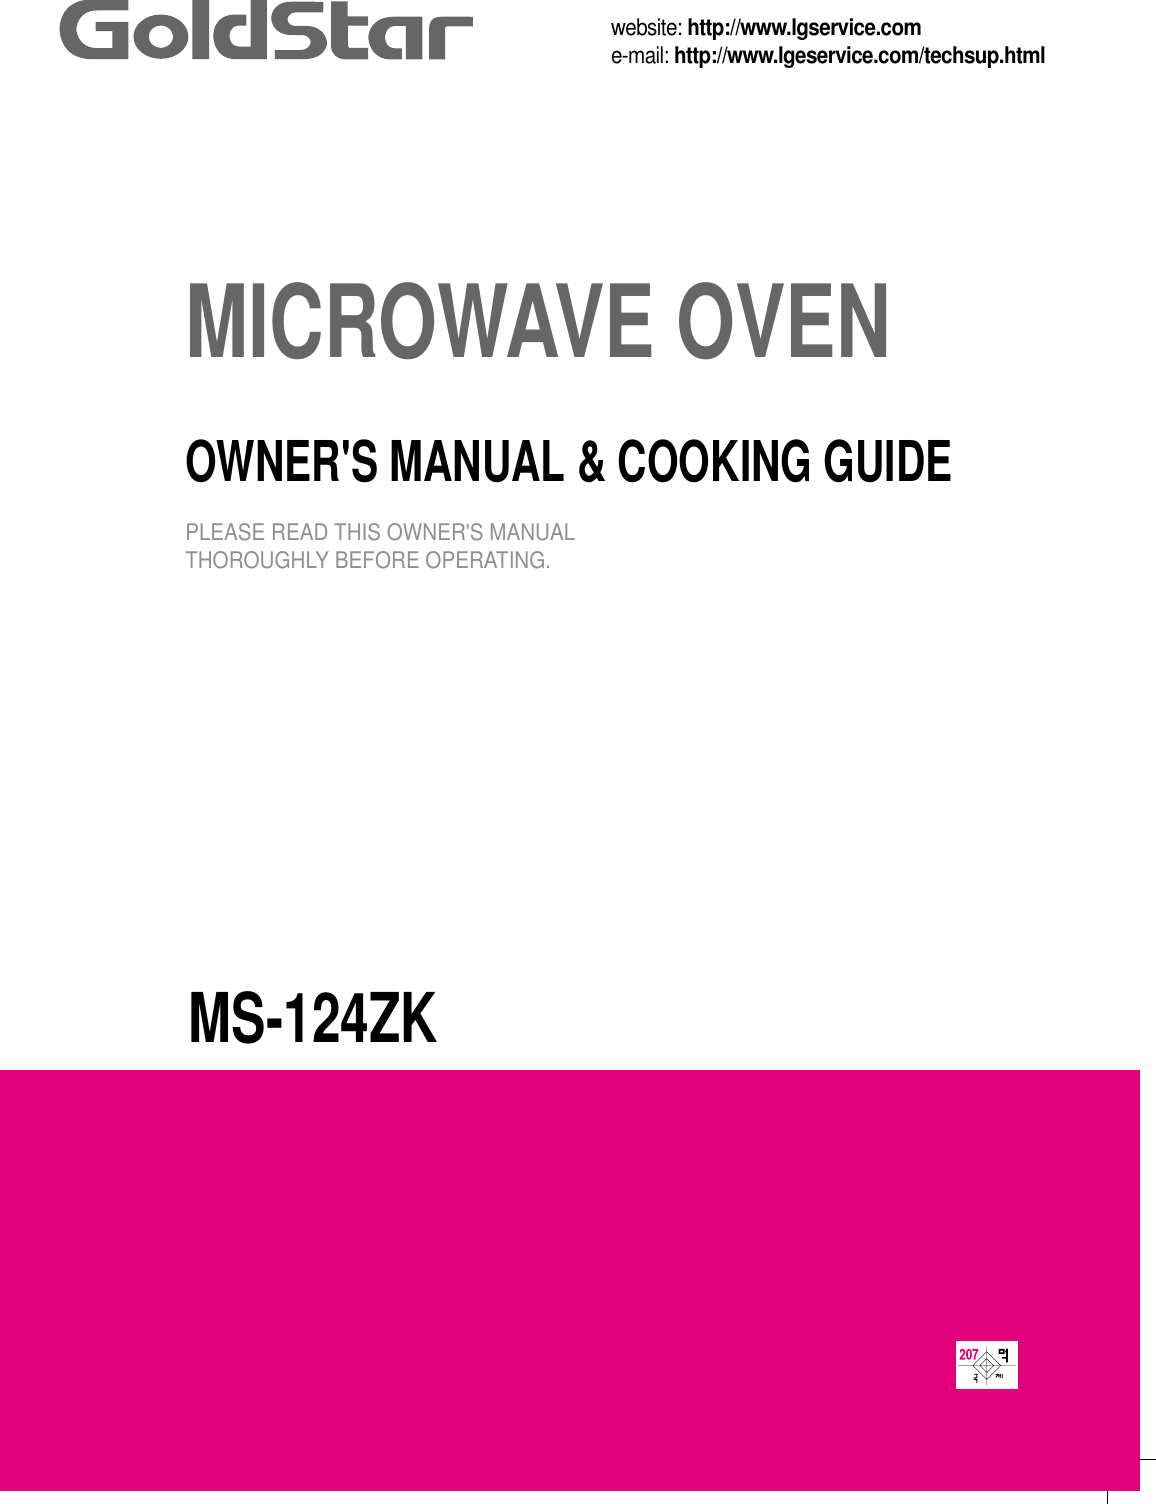 MS-124ZKMICROWAVE OVENOWNER&apos;S MANUAL &amp; COOKING GUIDEPLEASE READ THIS OWNER&apos;S MANUALTHOROUGHLY BEFORE OPERATING.website: http://www.lgservice.come-mail: http://www.lgeservice.com/techsup.html